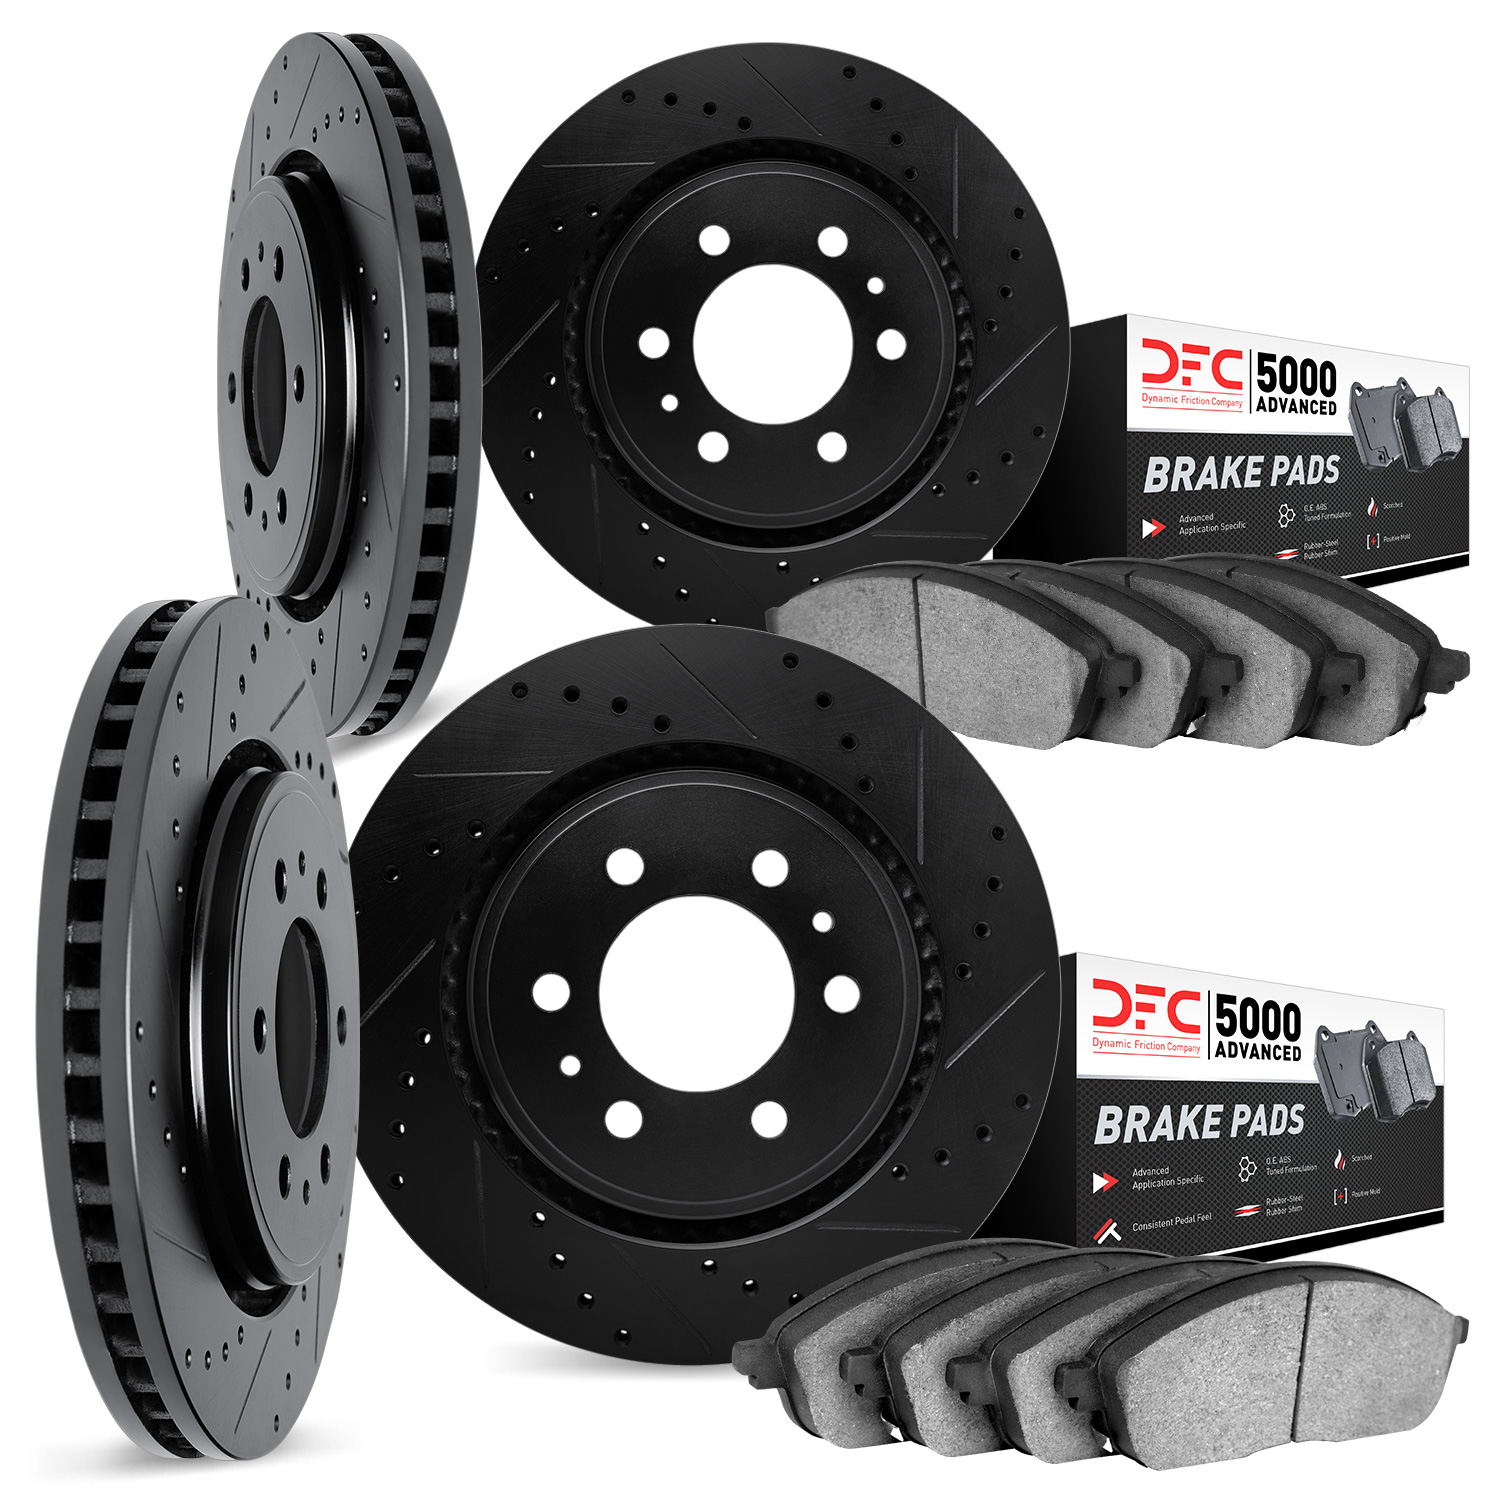 8504-48040 Drilled/Slotted Brake Rotors w/5000 Advanced Brake Pads Kit [Black], 2007-2008 GM, Position: Front and Rear